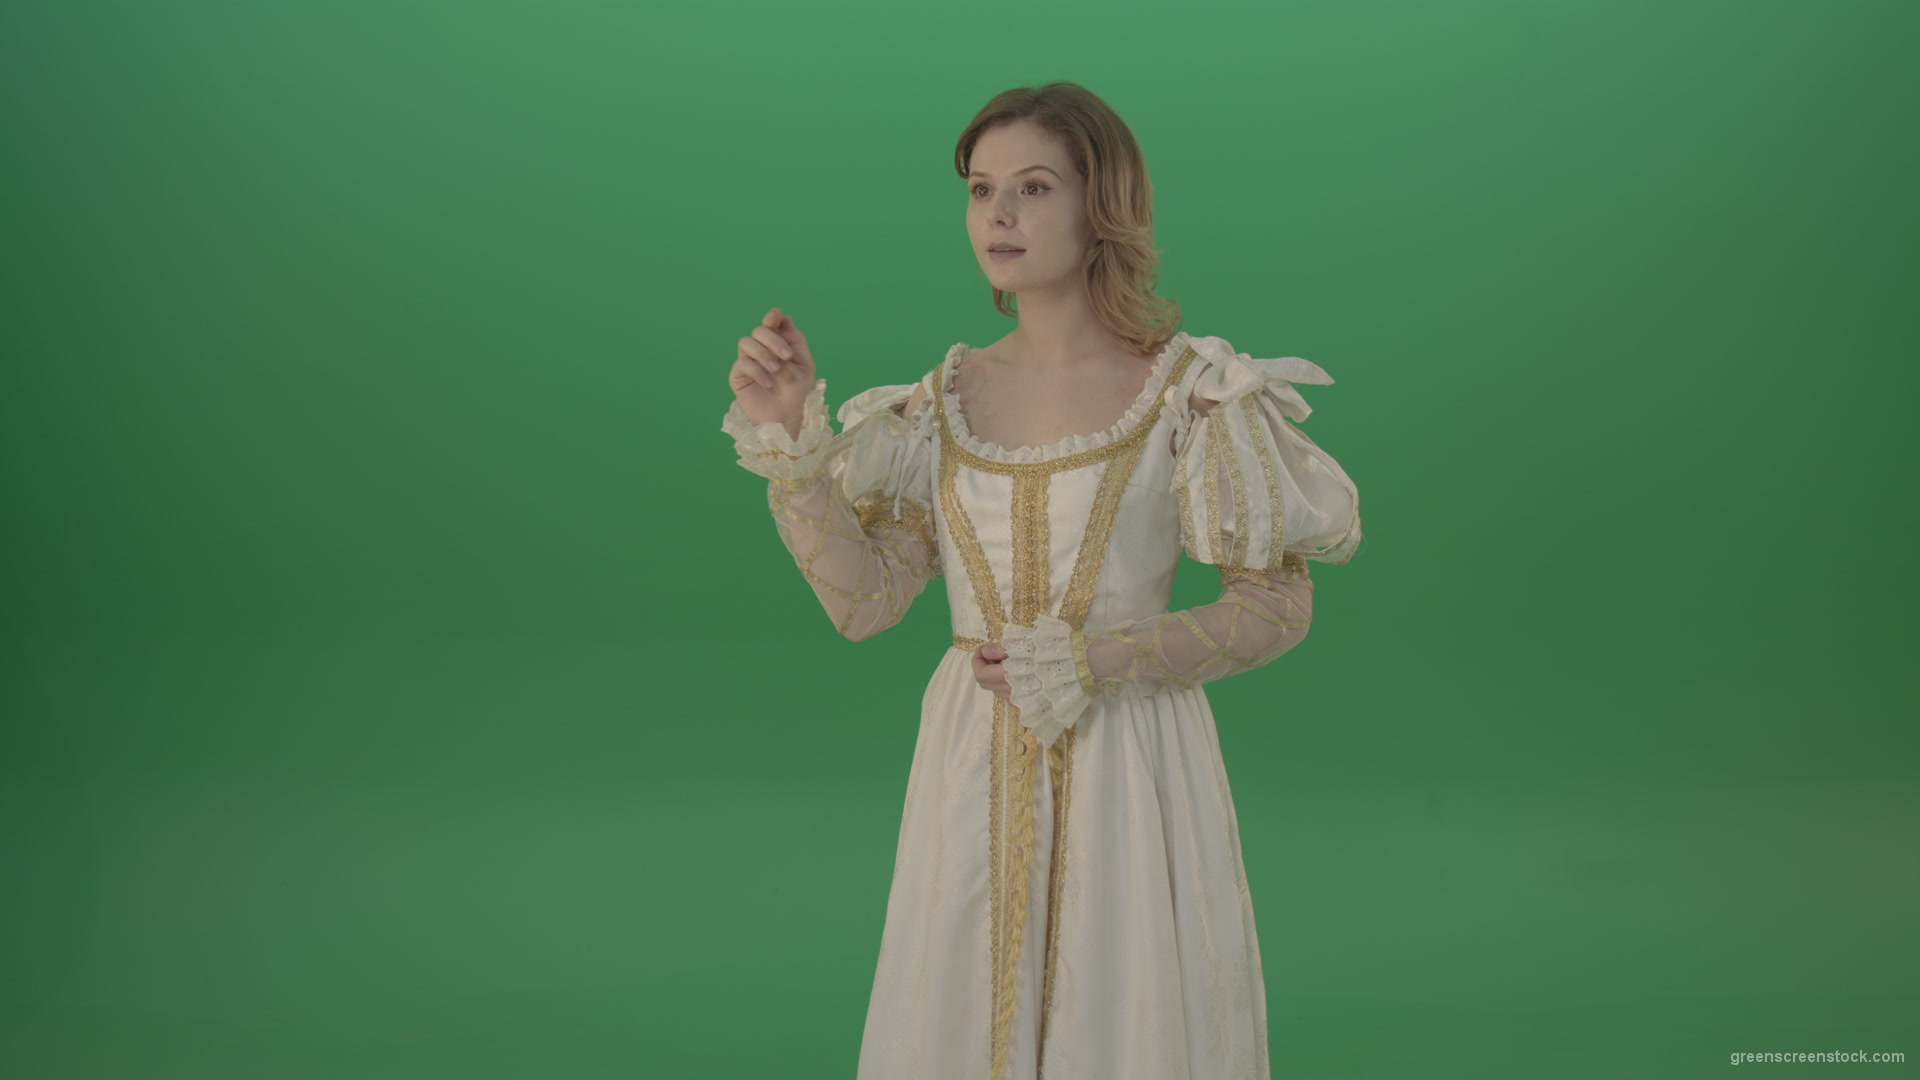 Flipping-a-virtual-reality-screen-the-girl-gladly-looks-at-the-photo-isolated-on-green-screen_004 Green Screen Stock